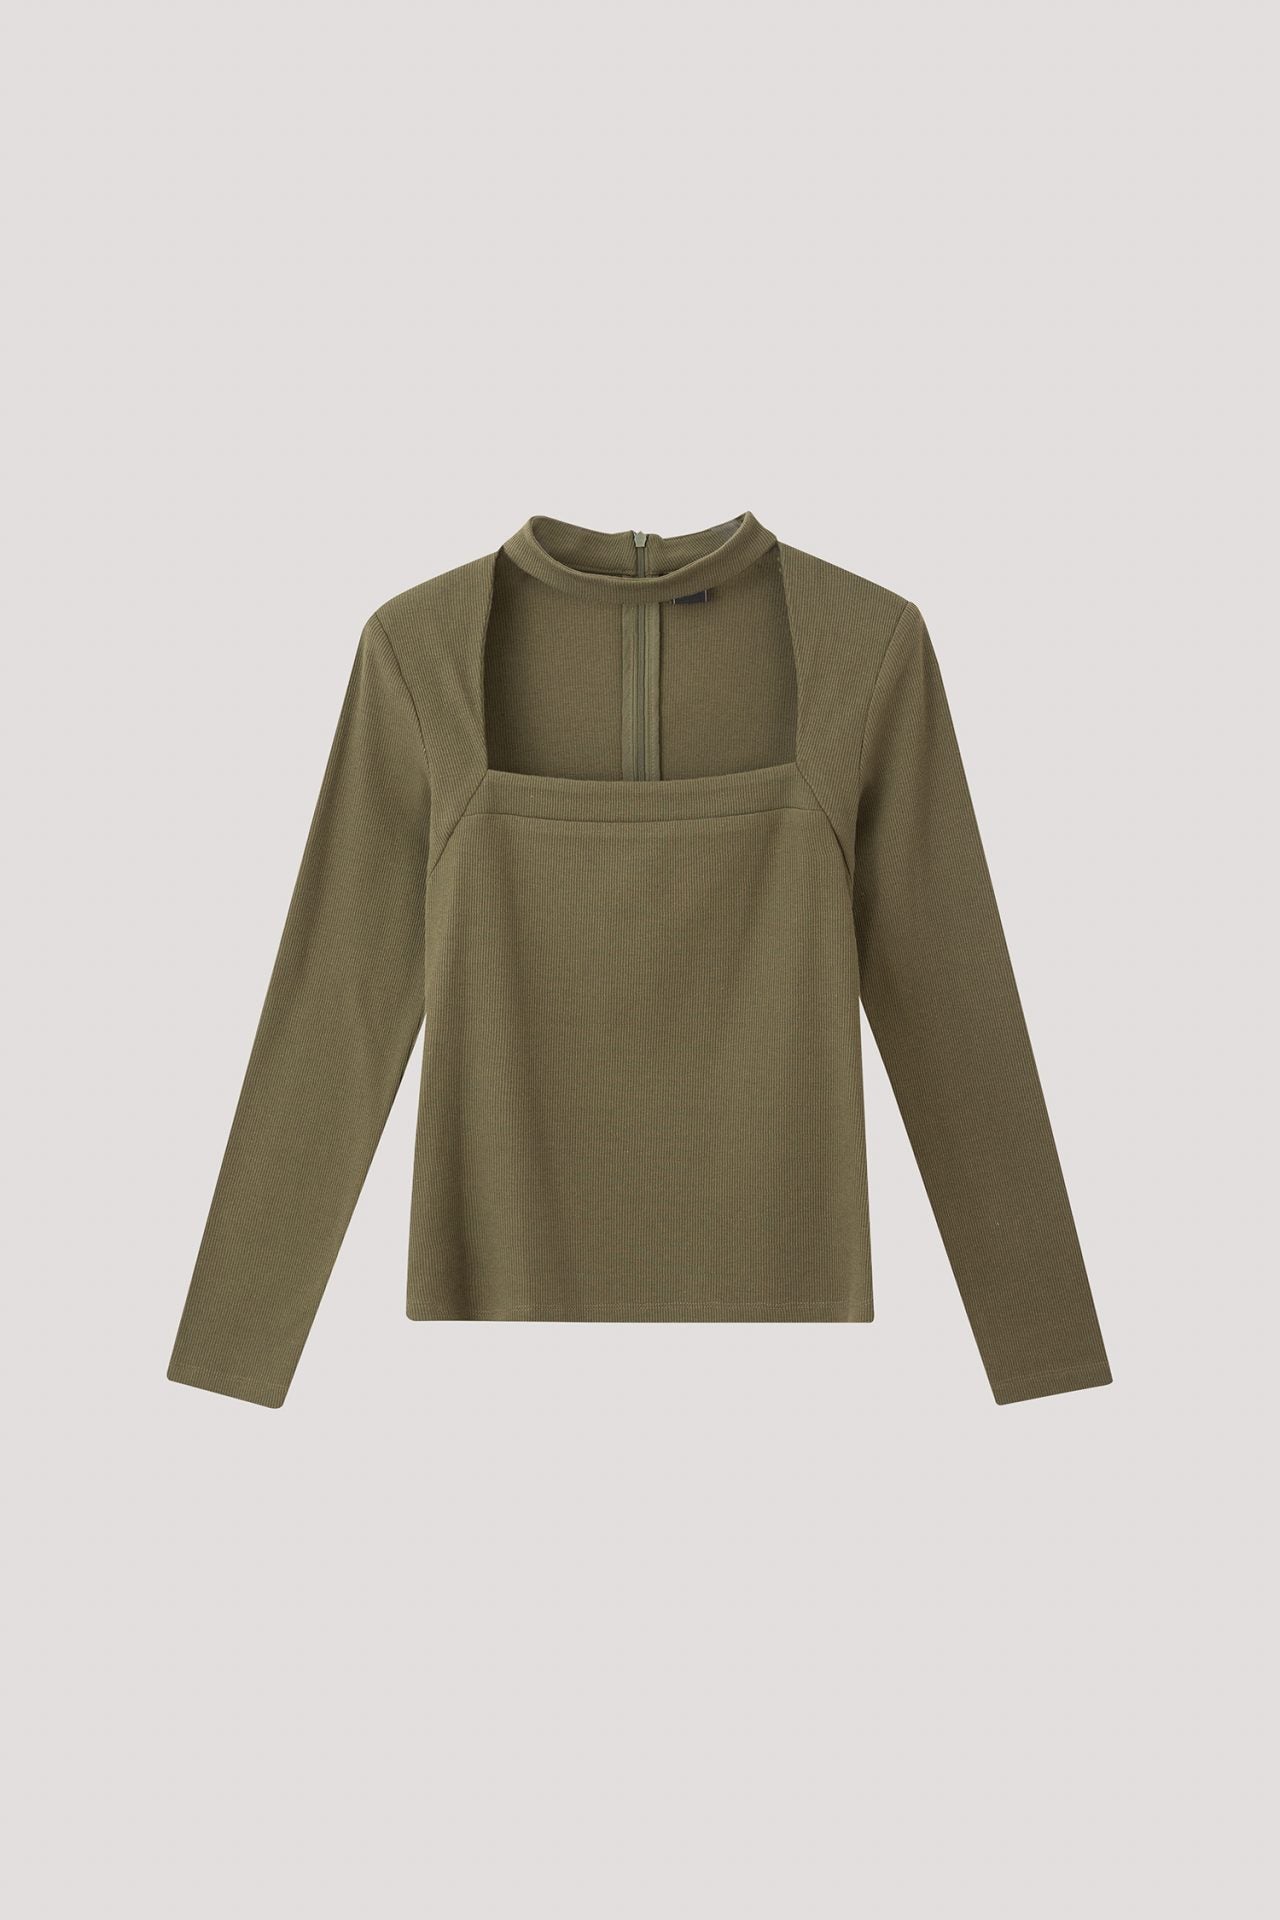 ATL 11095 FRONT SHOW BLOUSE ARMY GREEN